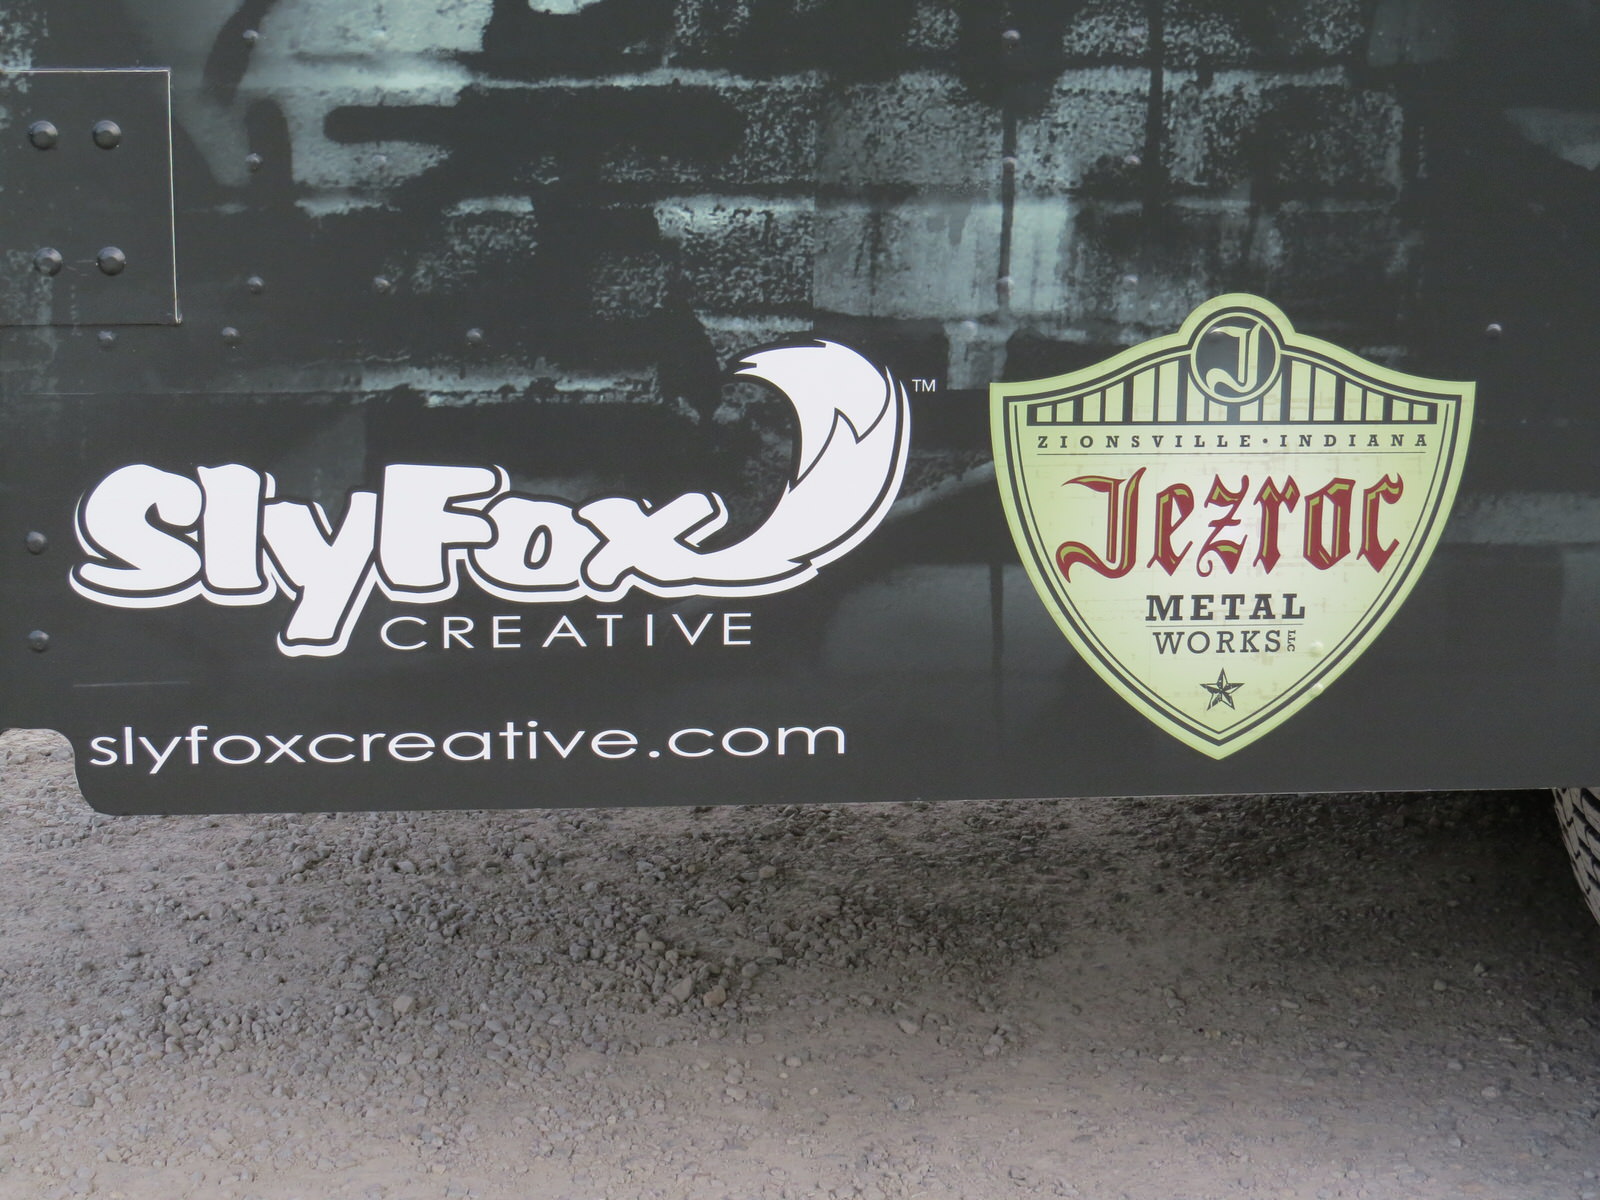 Jezroc Metalworks, SlyFox Creative, and several other talented vendors provided services on the truck.